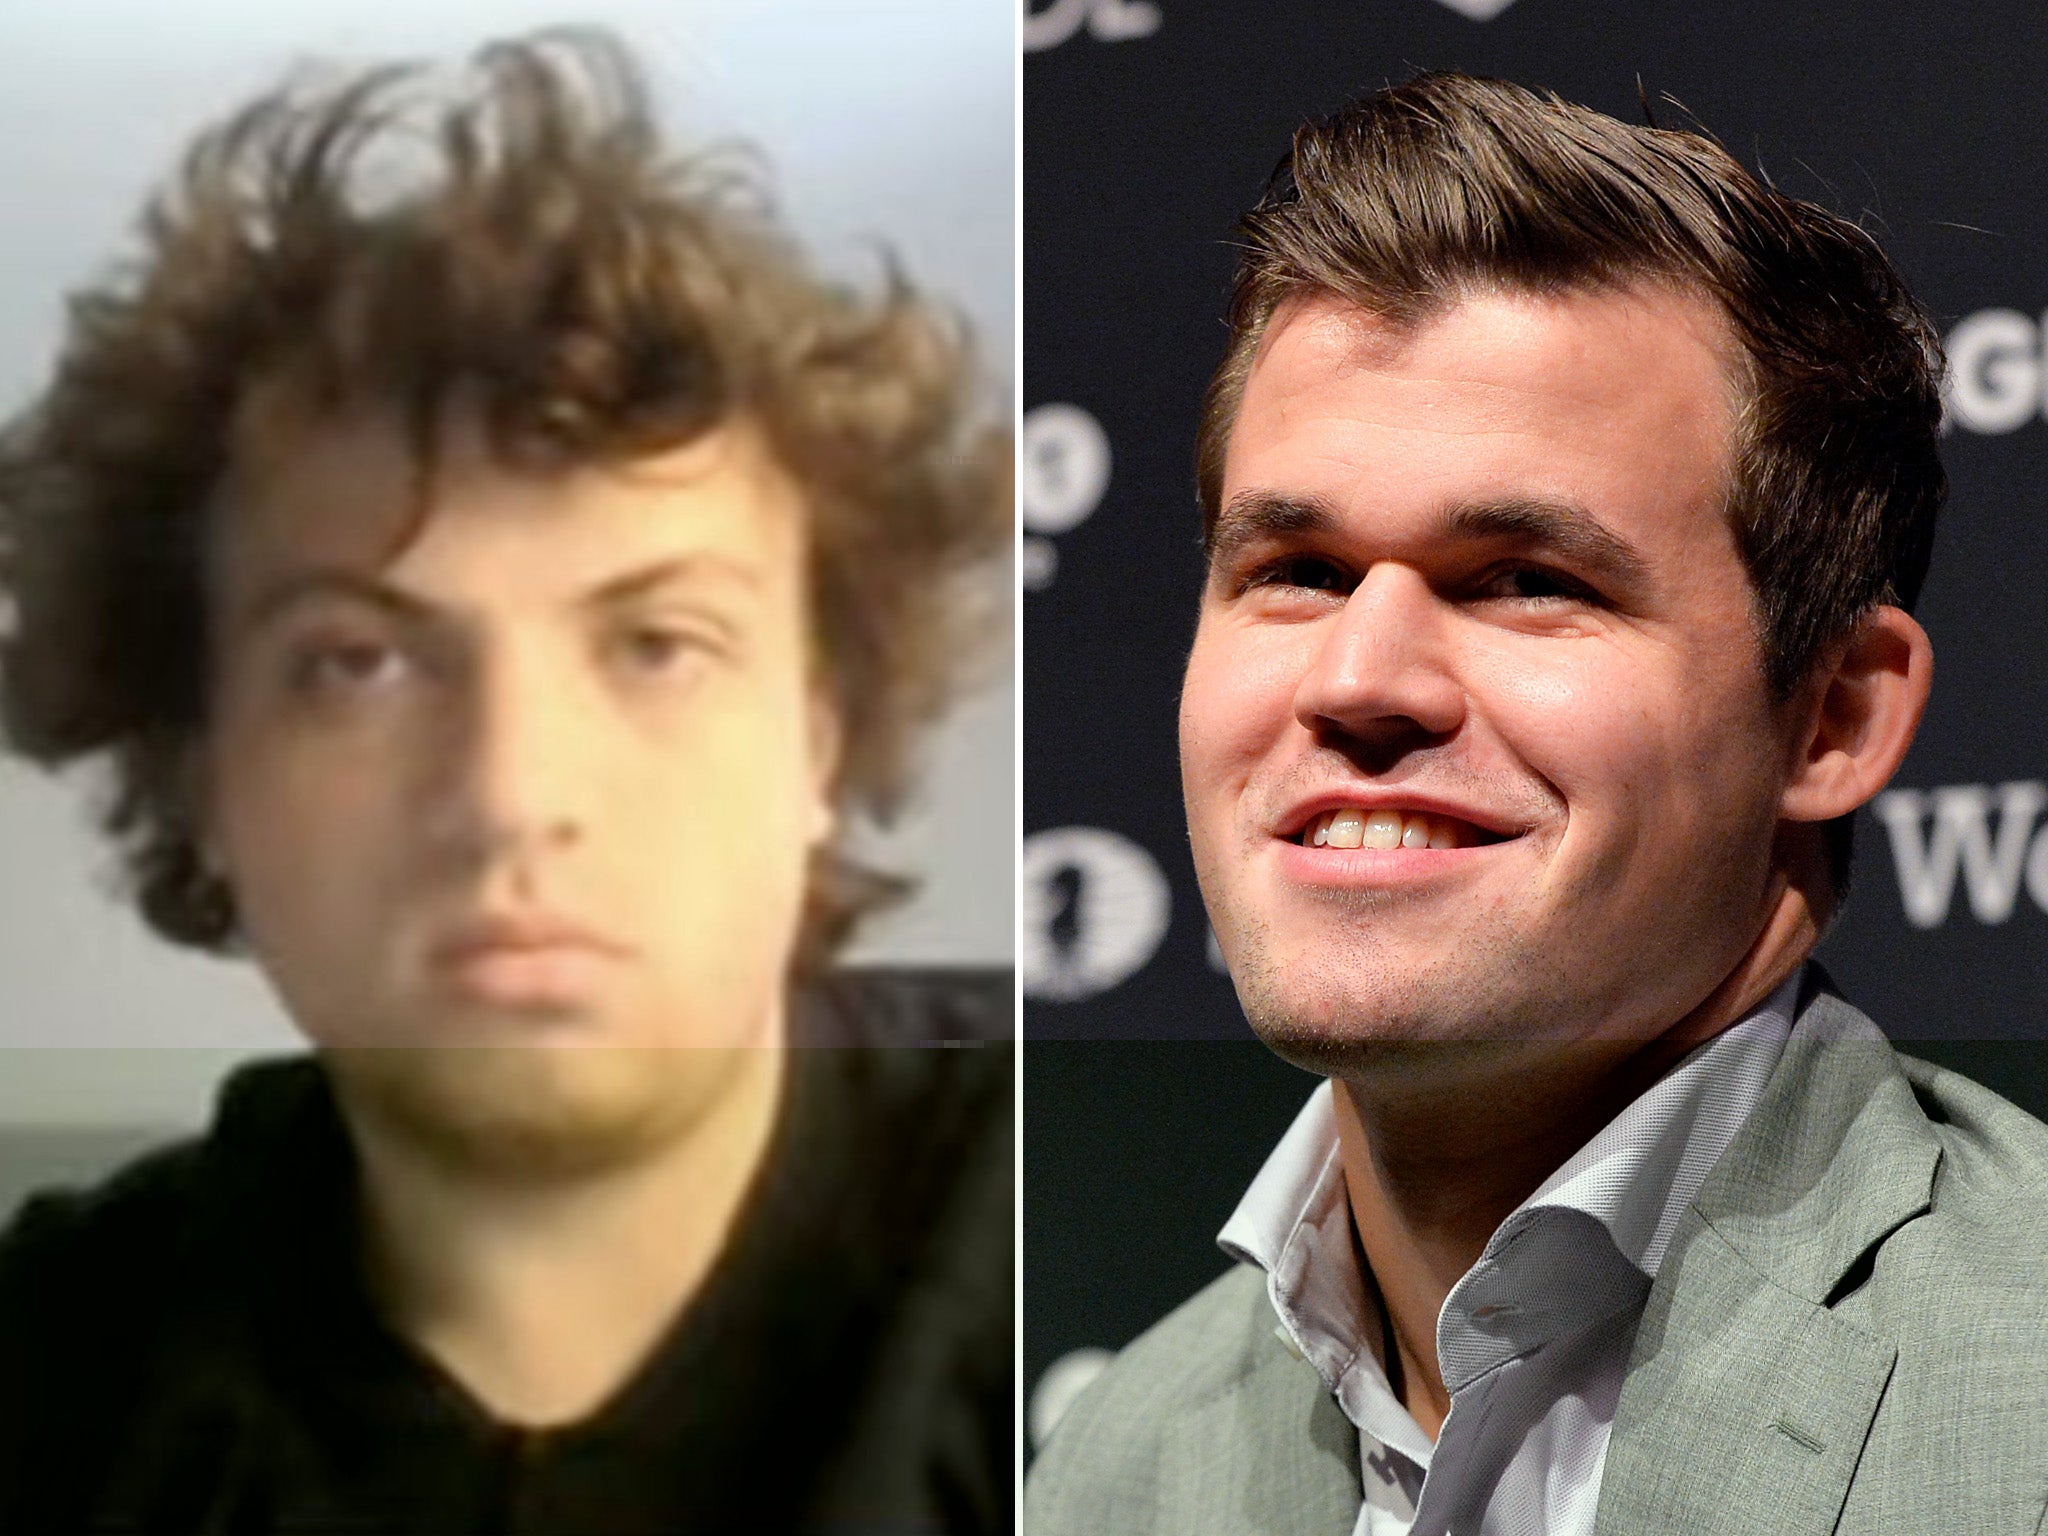 Magnus Carlsen quits match without explanation amid apparent feud with  fellow grandmaster Hans Niemann